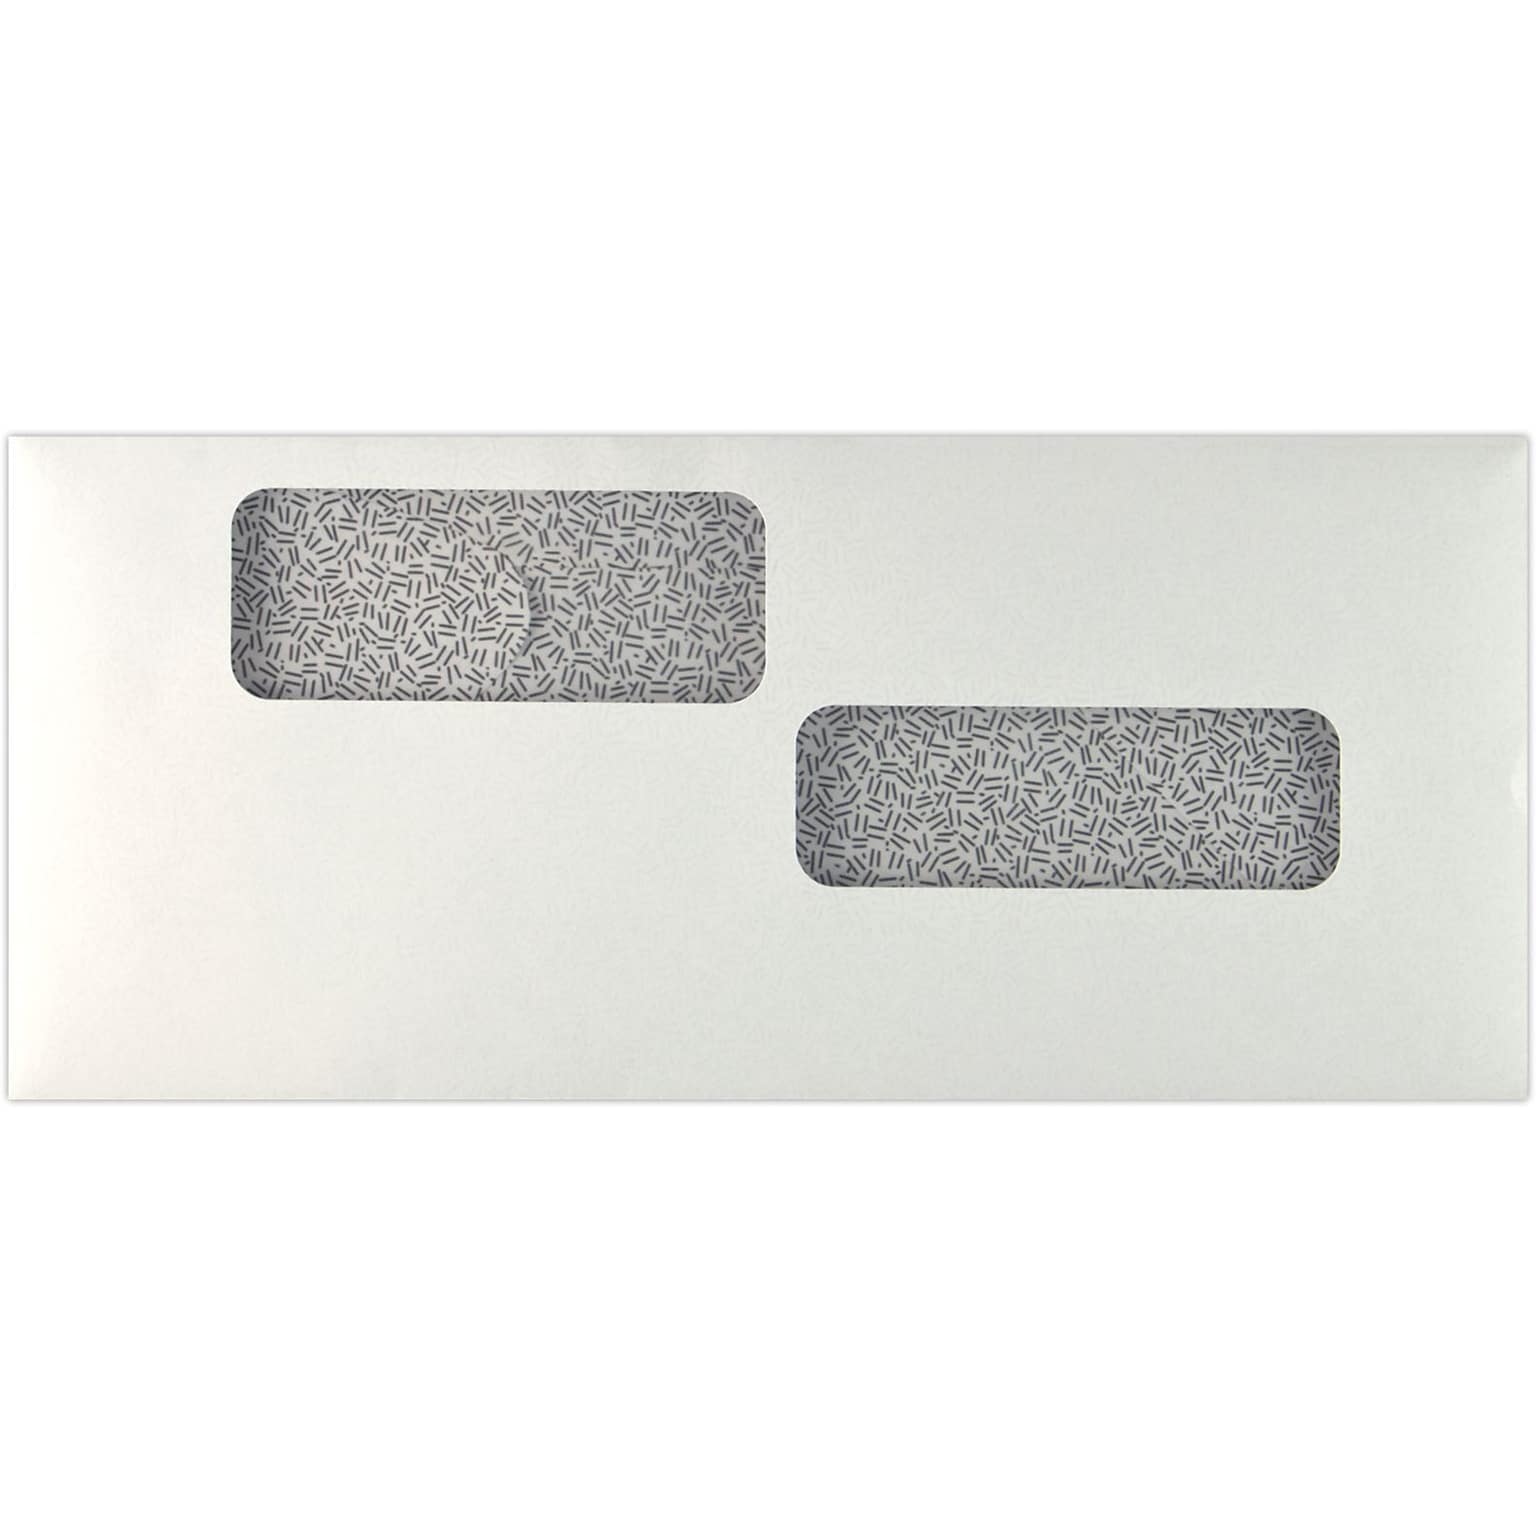 LUX Moistenable Glue Security Tinted #10 Double Window Envelope, 4 1/2 x 9 1/2, White, 500/Pack (10DW-24W-500)